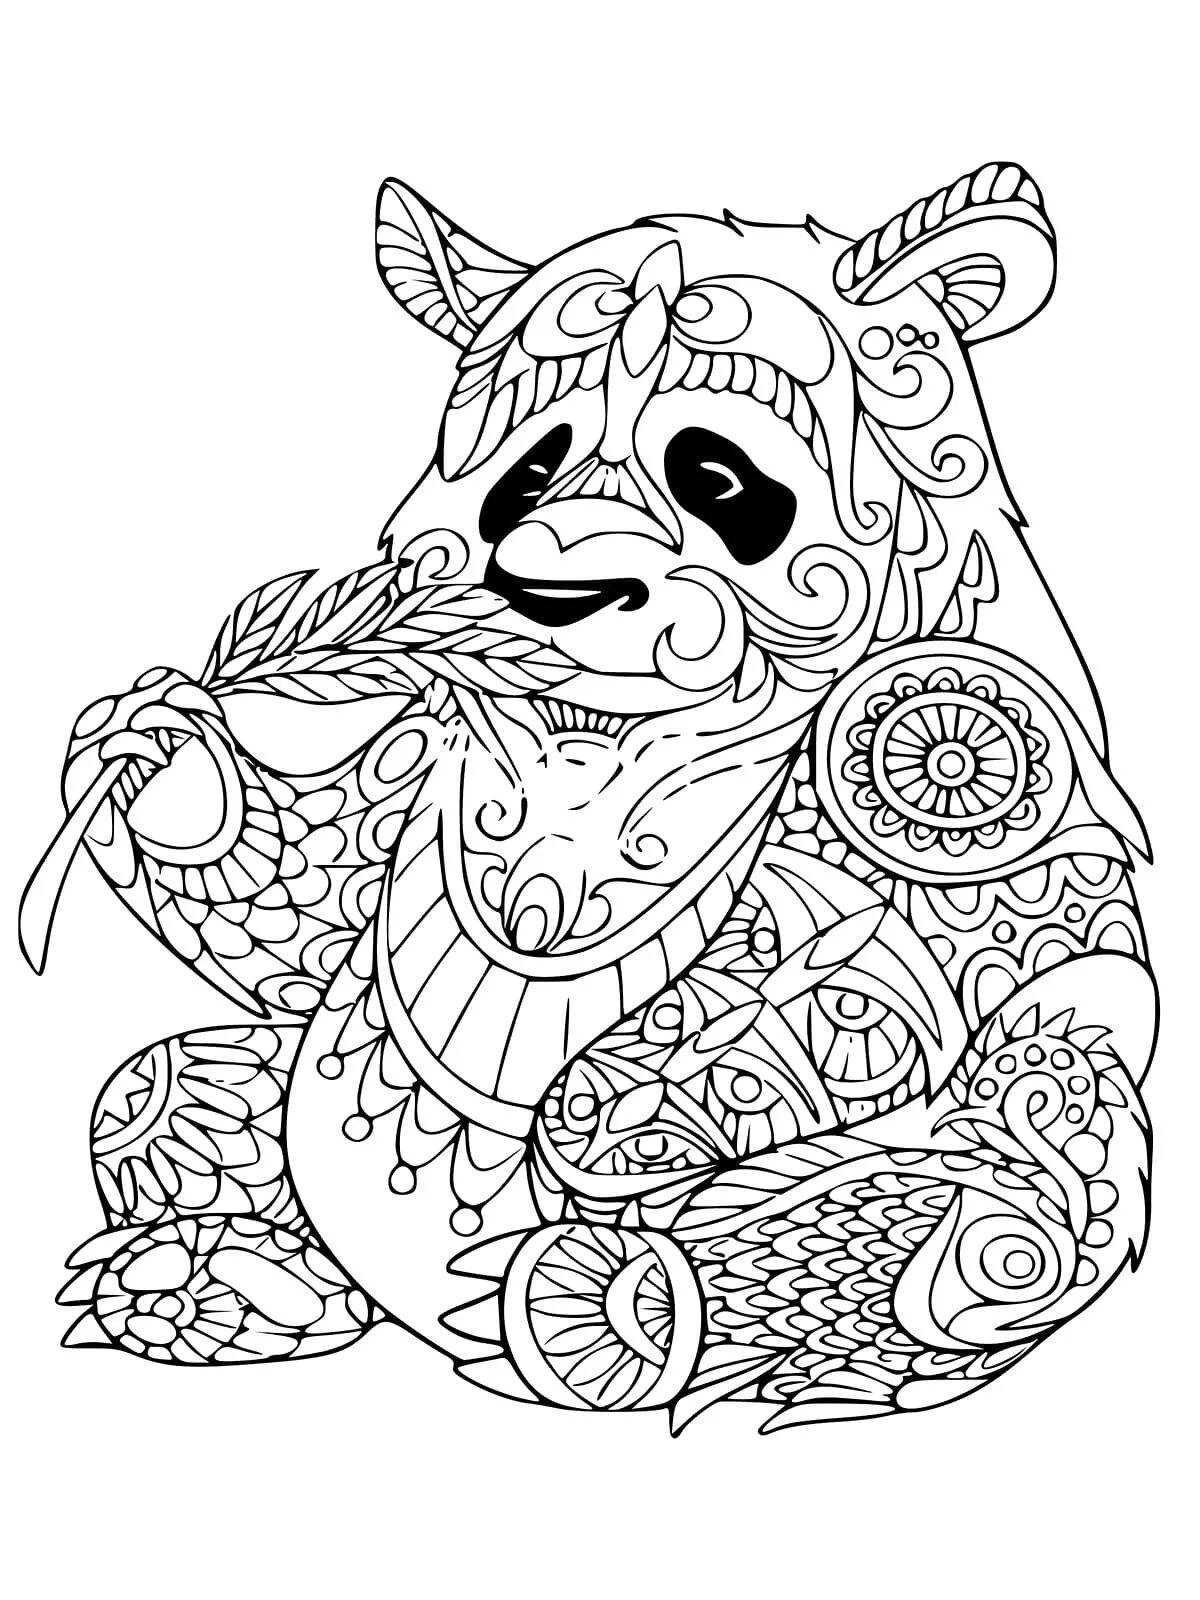 Majestic antistress coloring book for adults